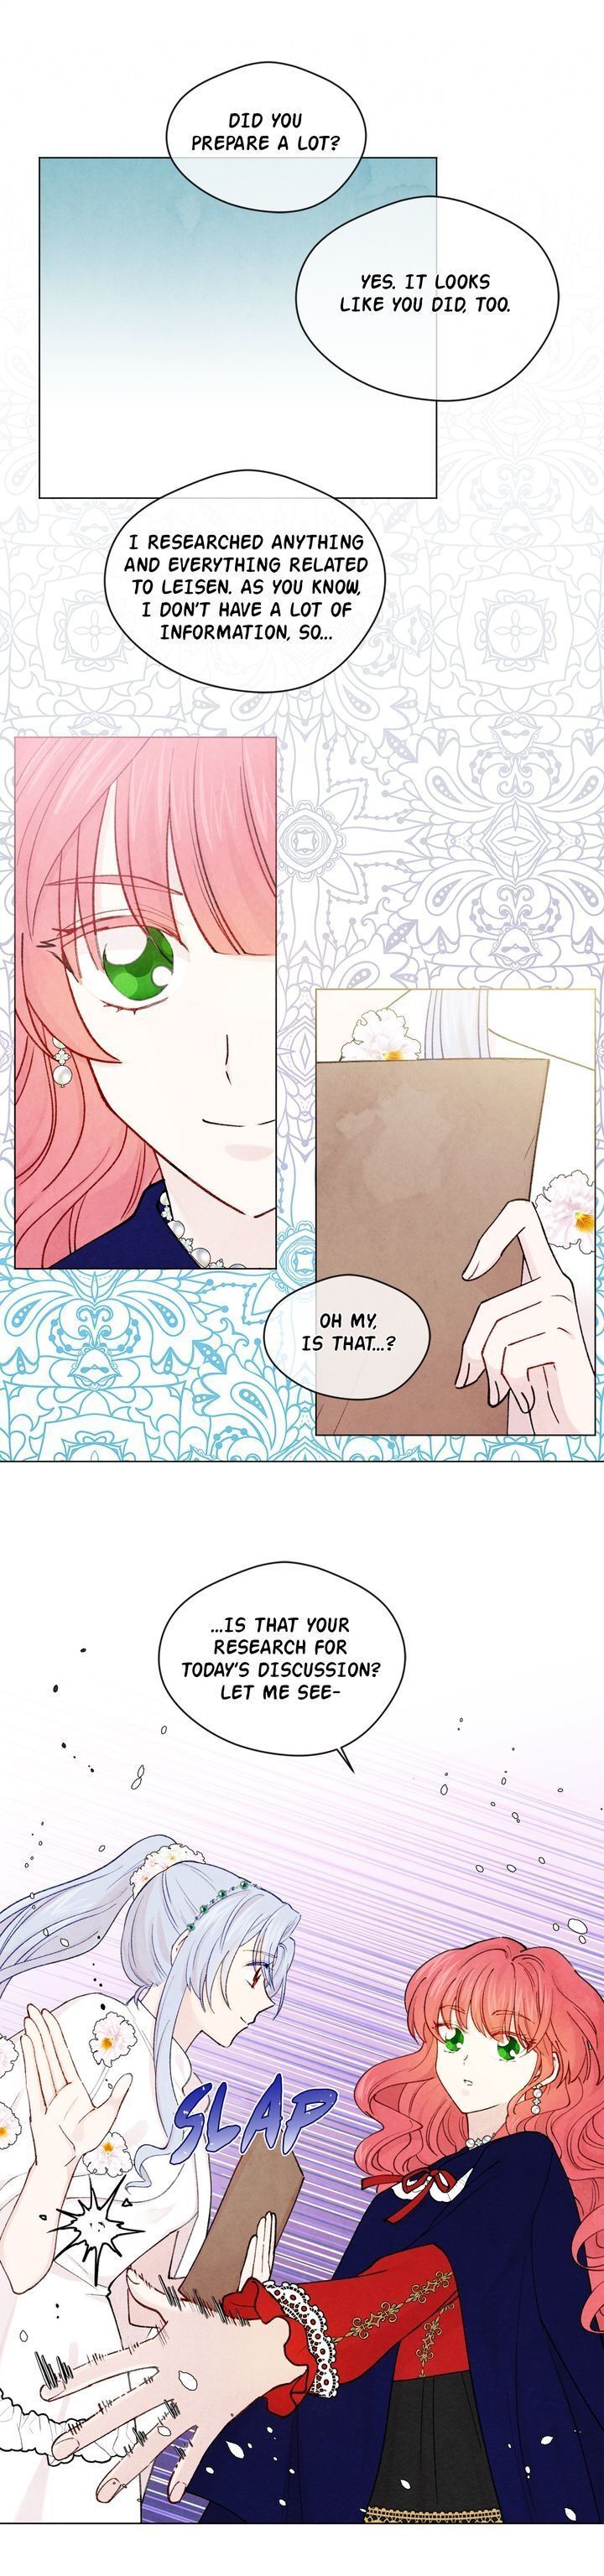 IRIS - Lady with a Smartphone Chapter 051 page 4